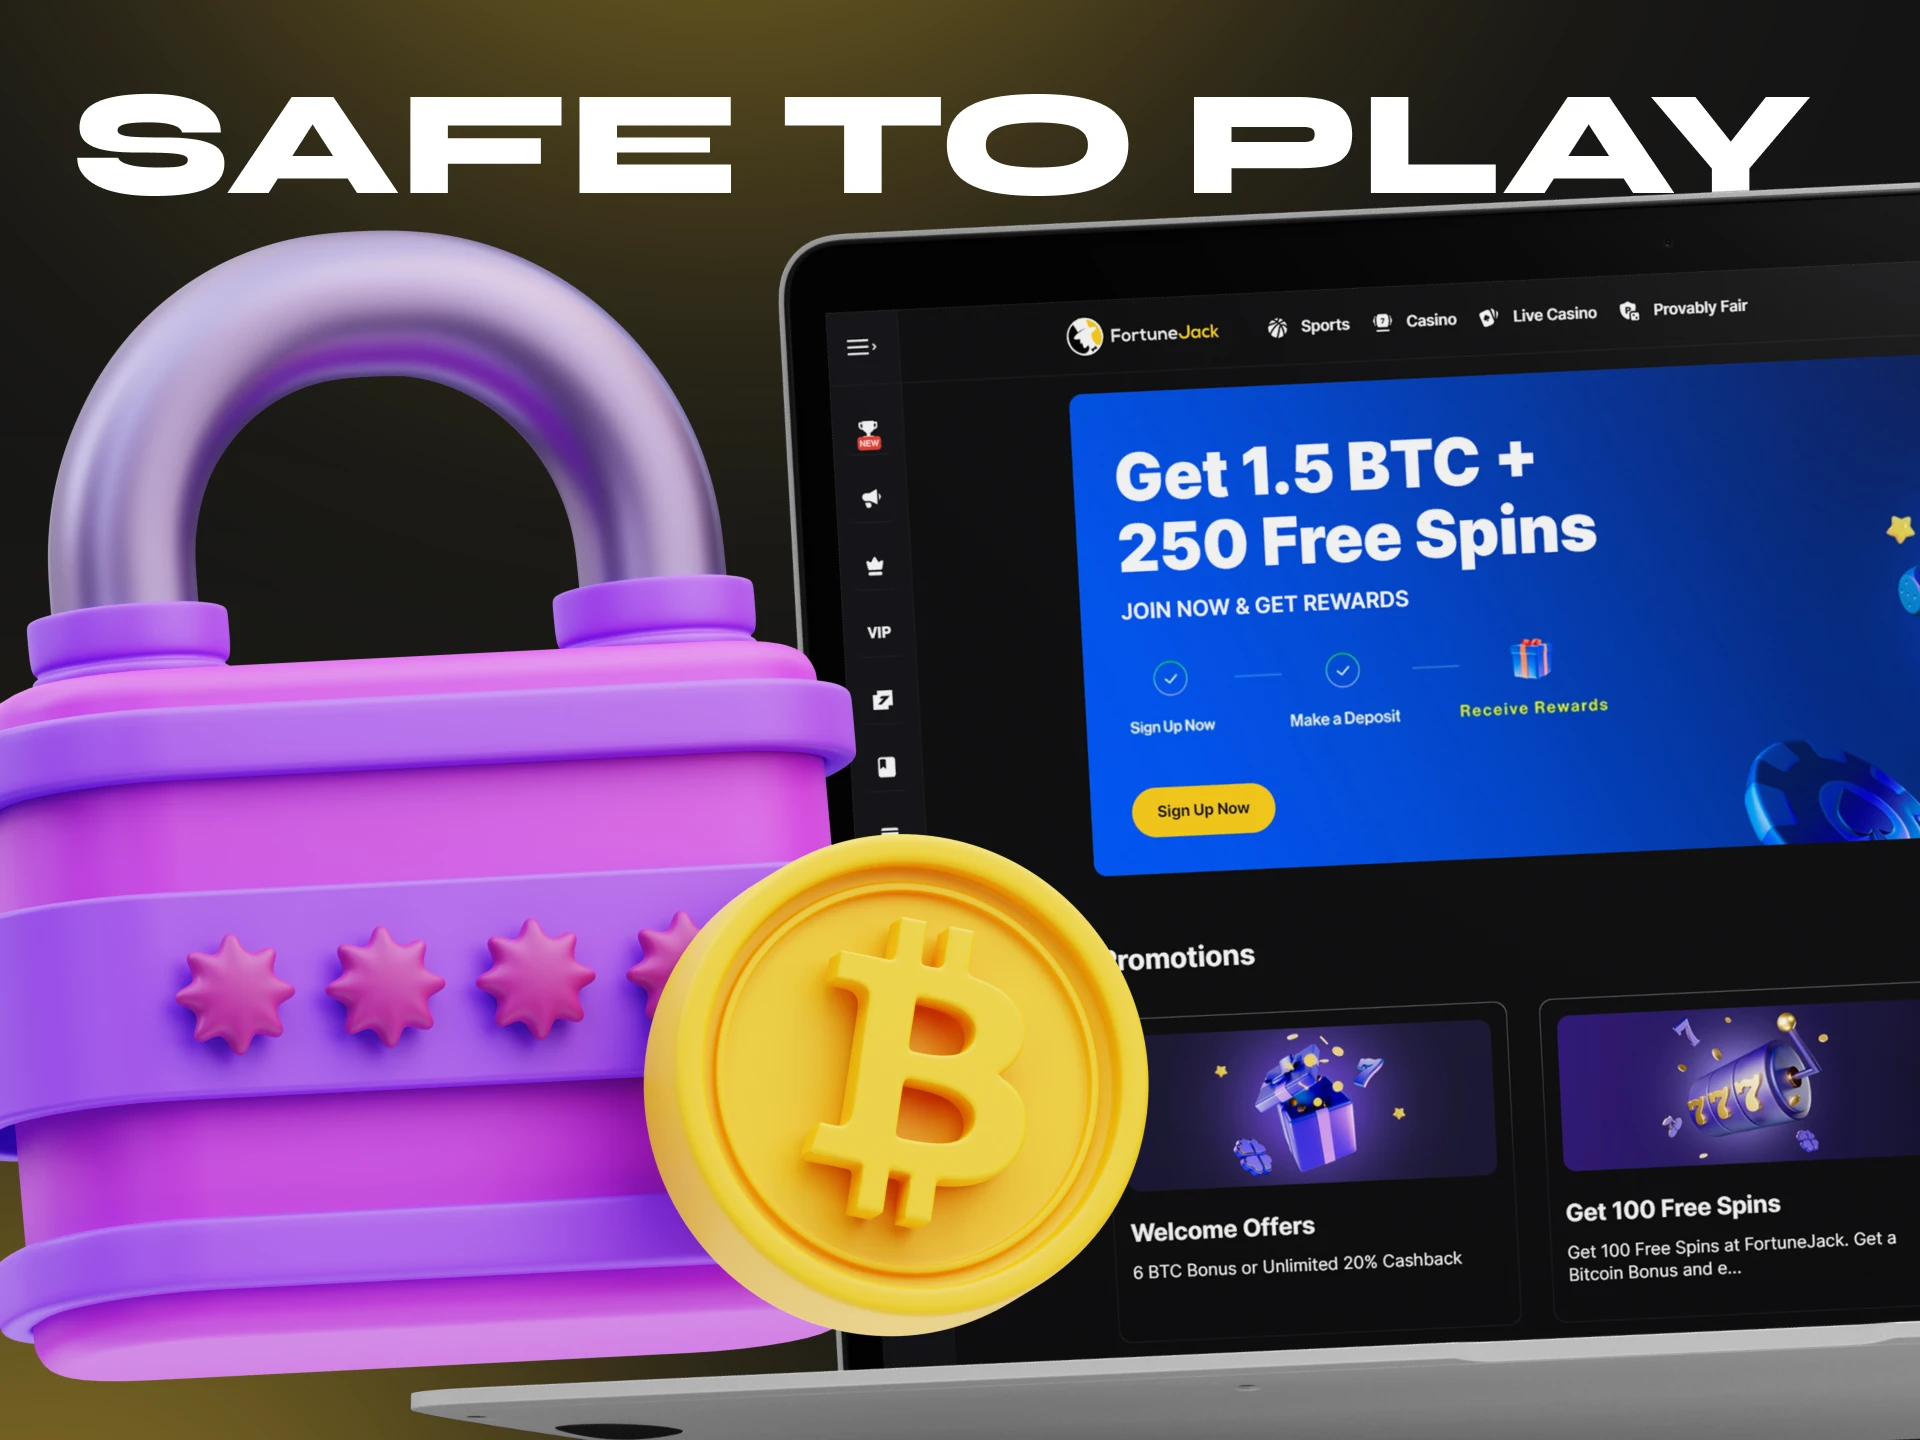 FortuneJack Casino provides security to its users.